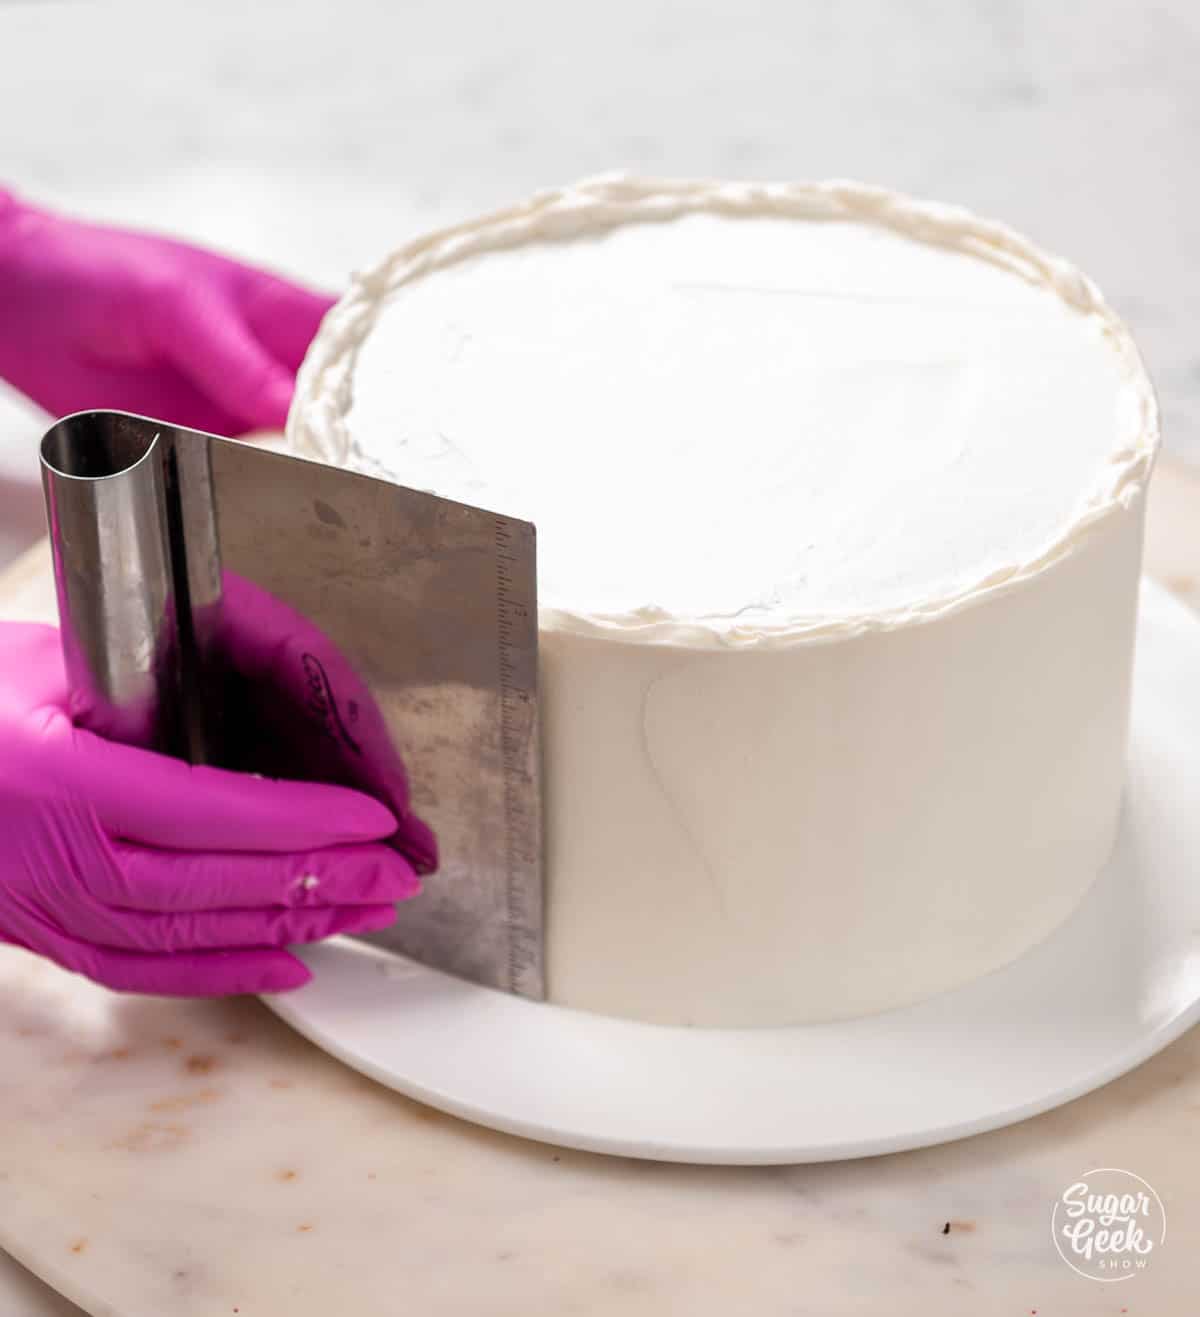 smoothing the sides of the ice cream cake with a bench scraper